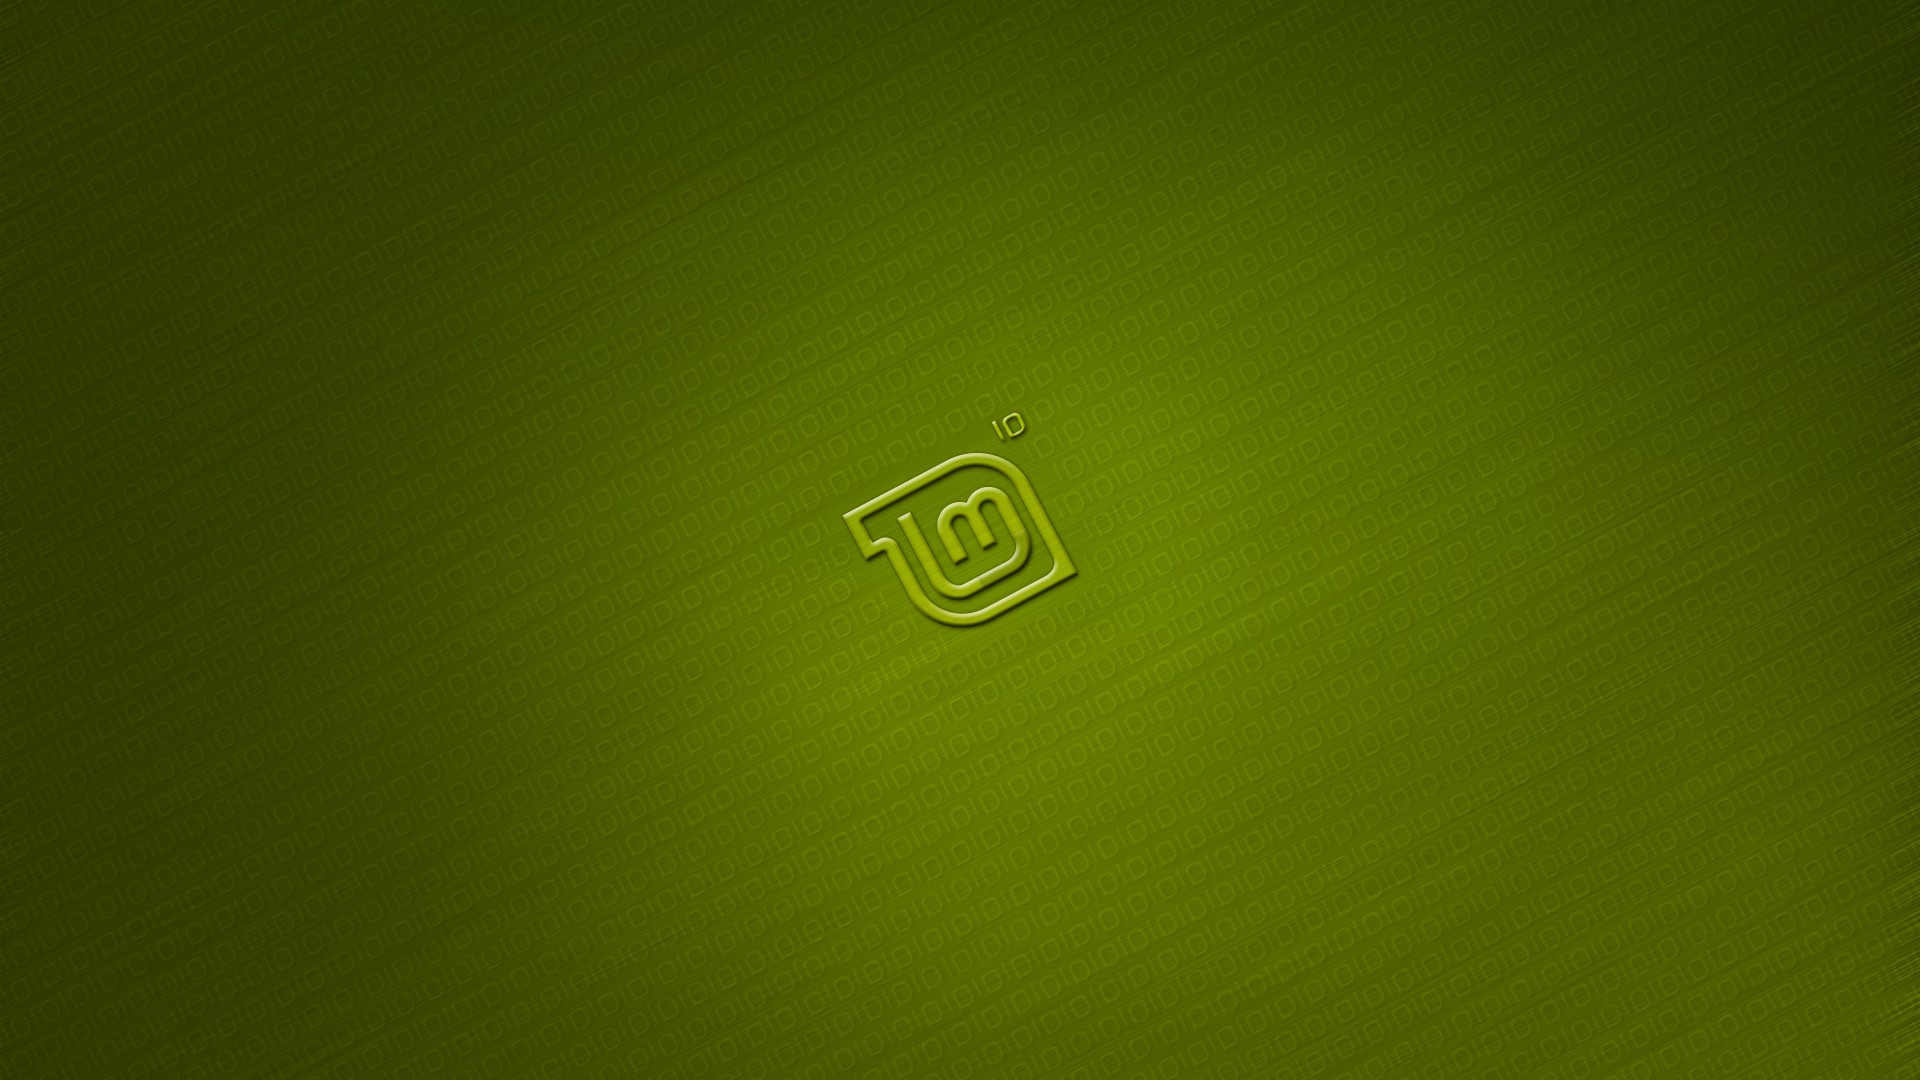 Cute Green Desktop Wallpaper with image resolution 1920x1080 pixel. You can use this wallpaper as background for your desktop Computer Screensavers, Android or iPhone smartphones